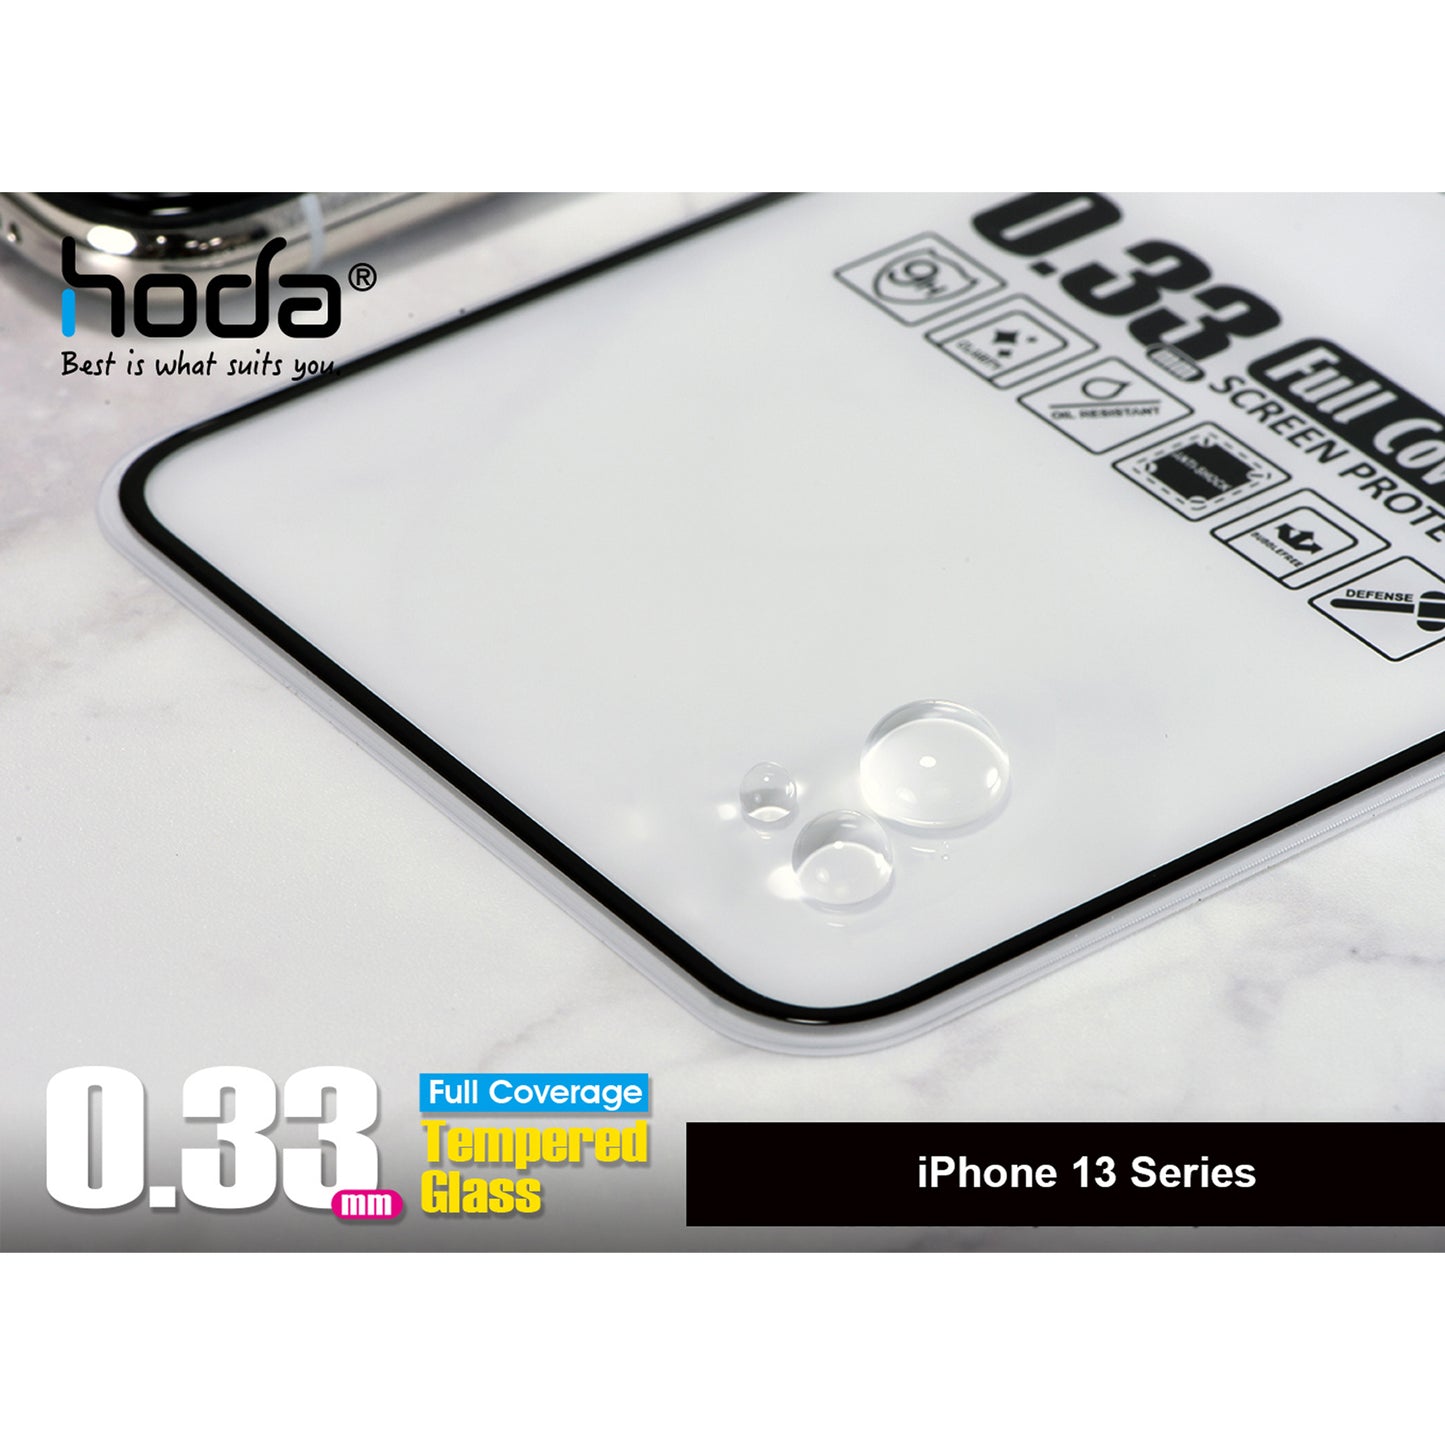 Hoda Tempered Glass for iPhone 13 Mini 5.4" 5G ( 2.5D 0.33mm Full Coverage ) - Clear (Barcode: 4711103541647 )